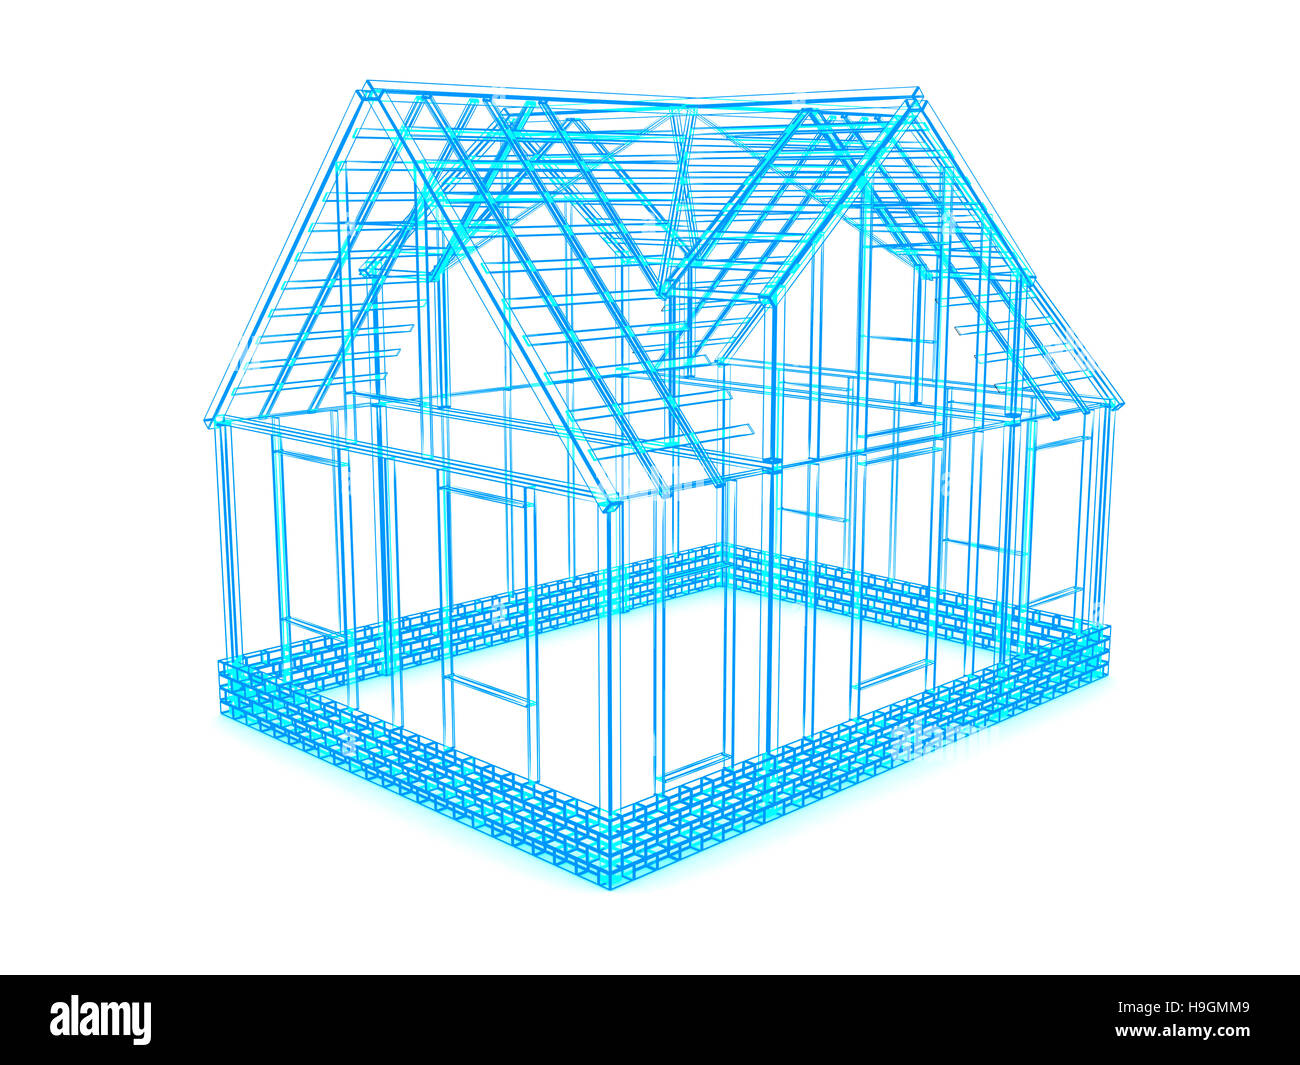 3d illustration of frame house drawing over white background Stock Photo